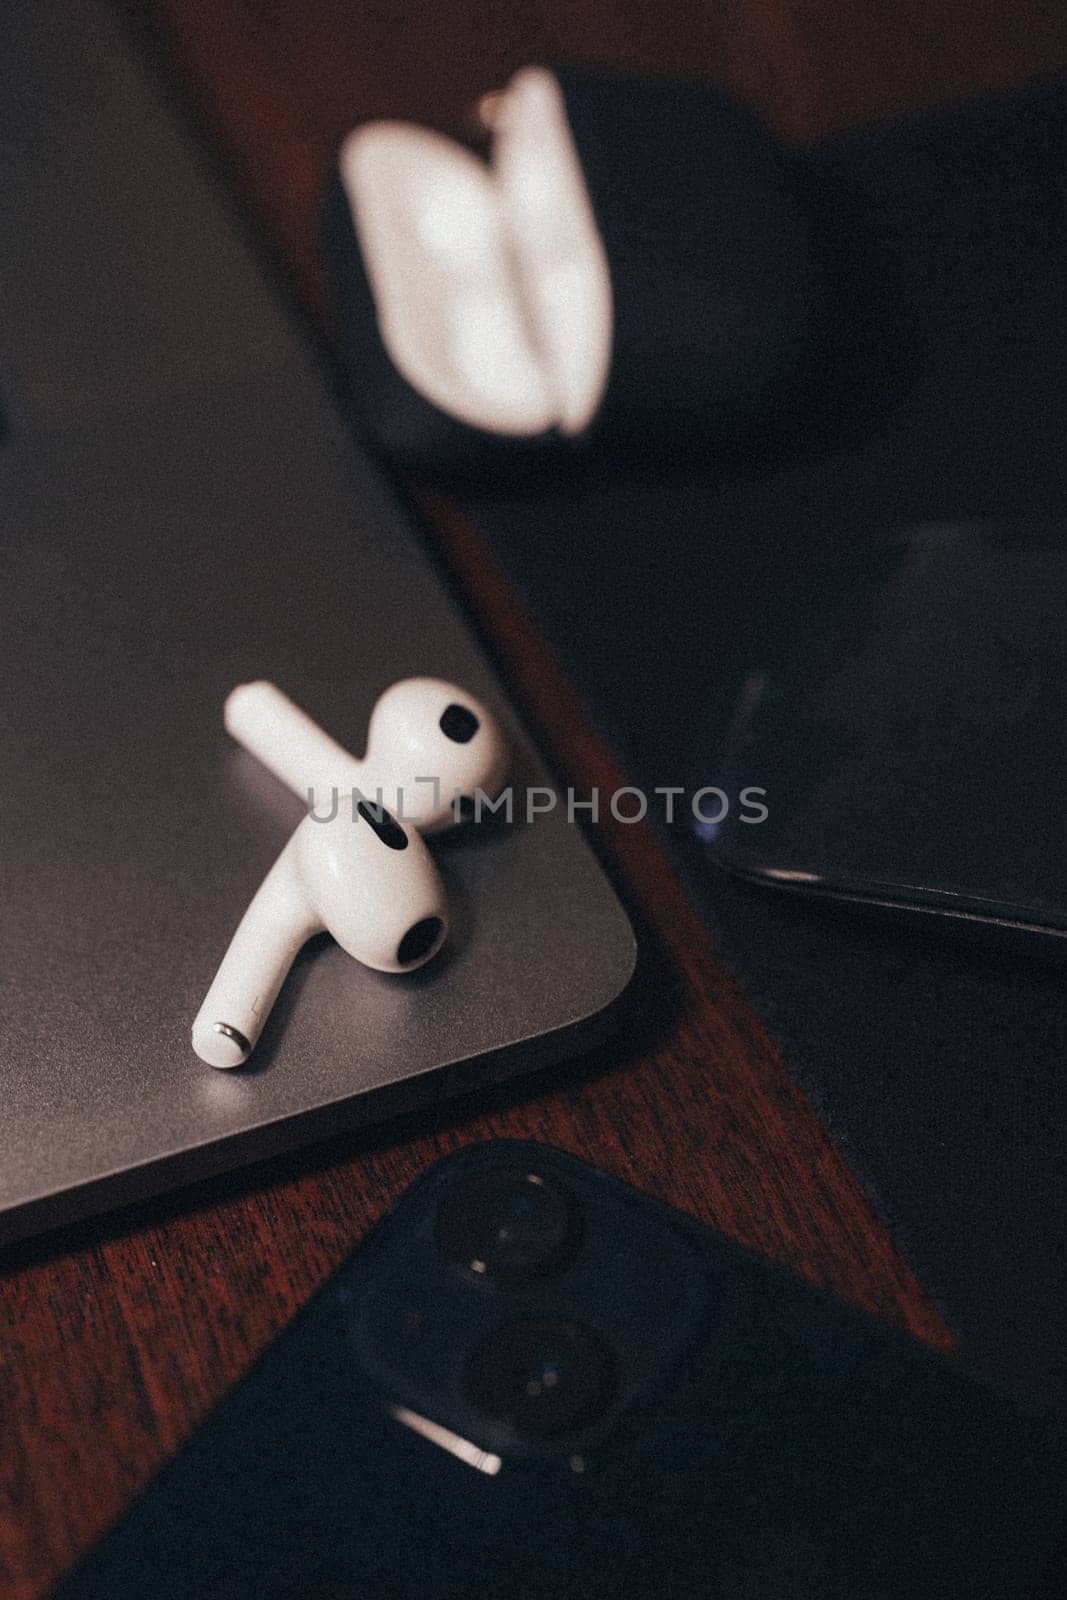 A pair of sleek, white, wireless earphones rest on a silver laptop with a black keyboard. The earphones are designed for comfort and style.